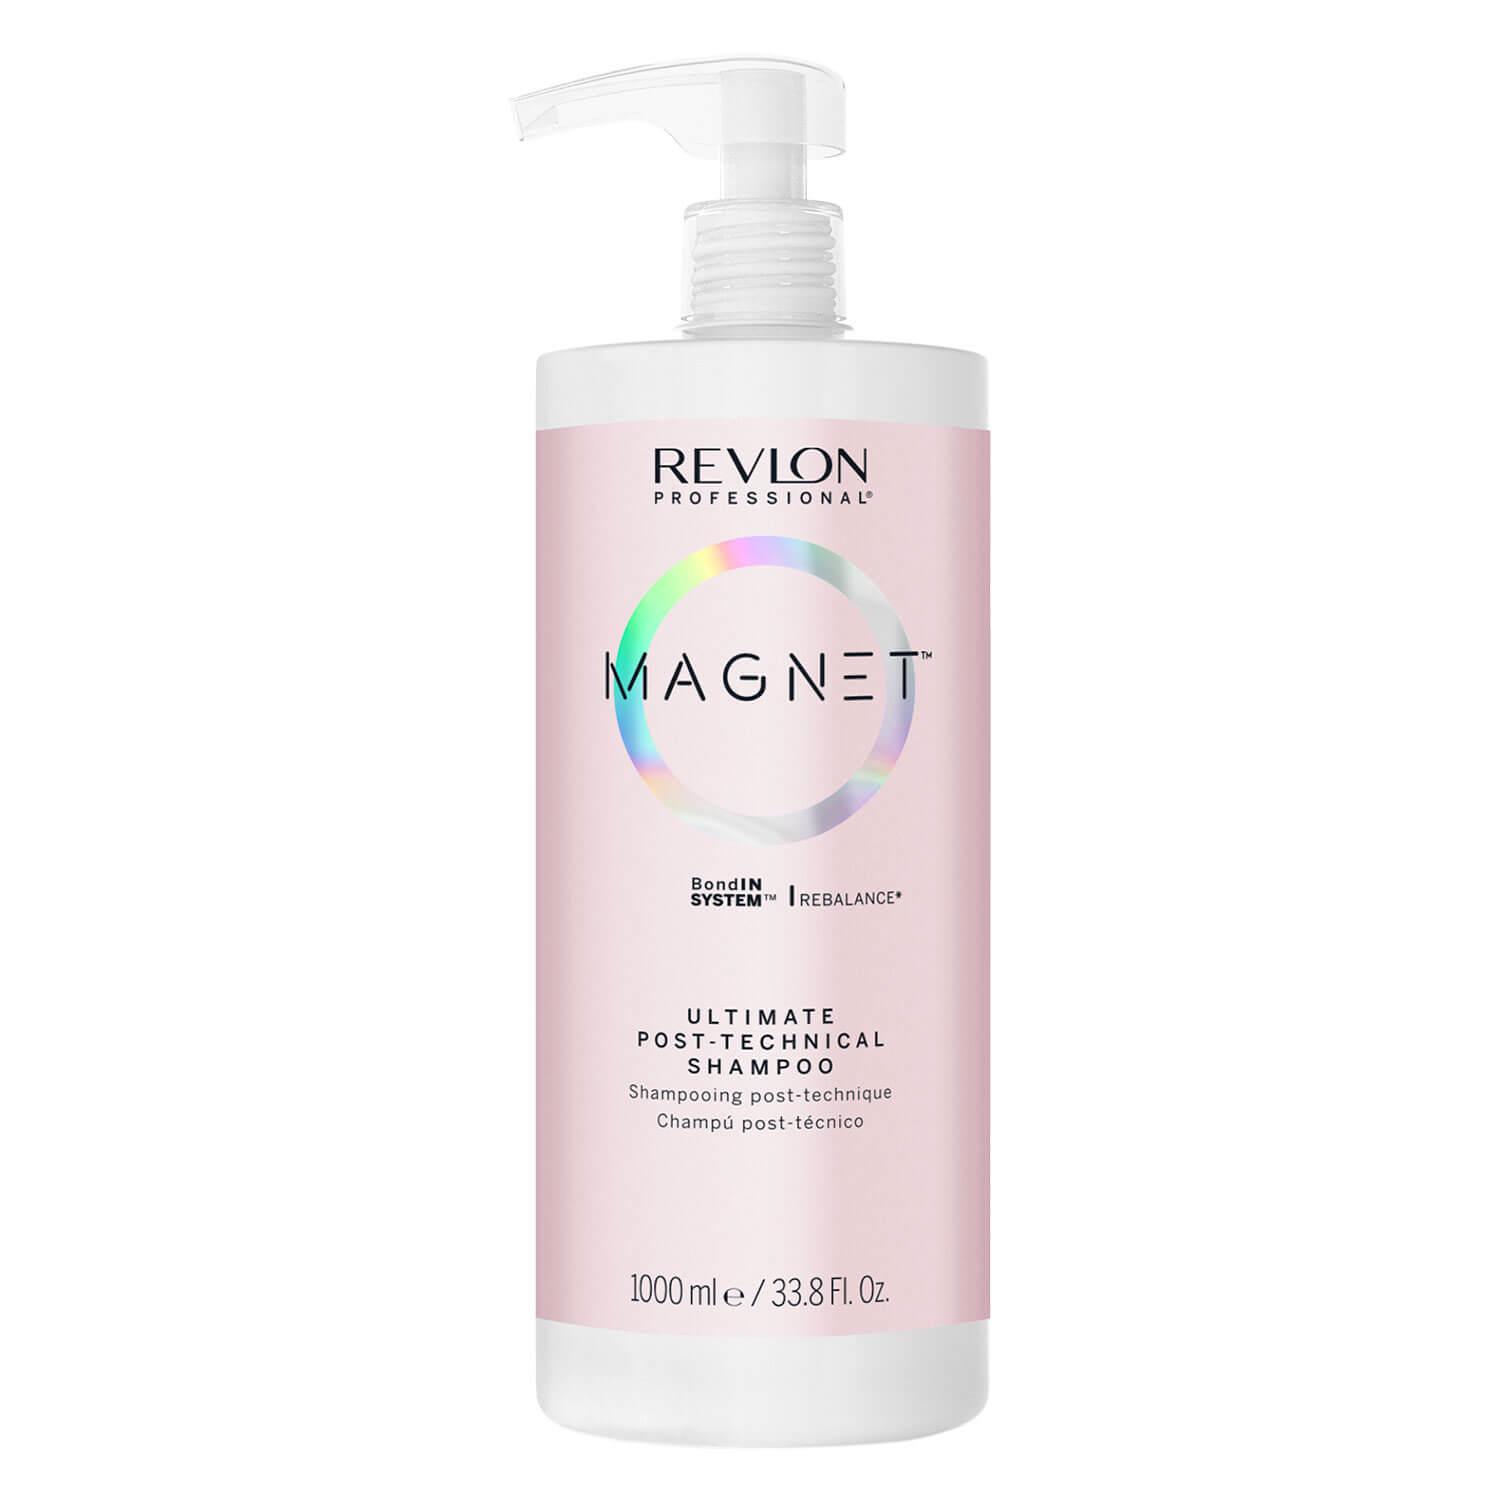 Magnet - Ultimate Post-Technical Shampoo